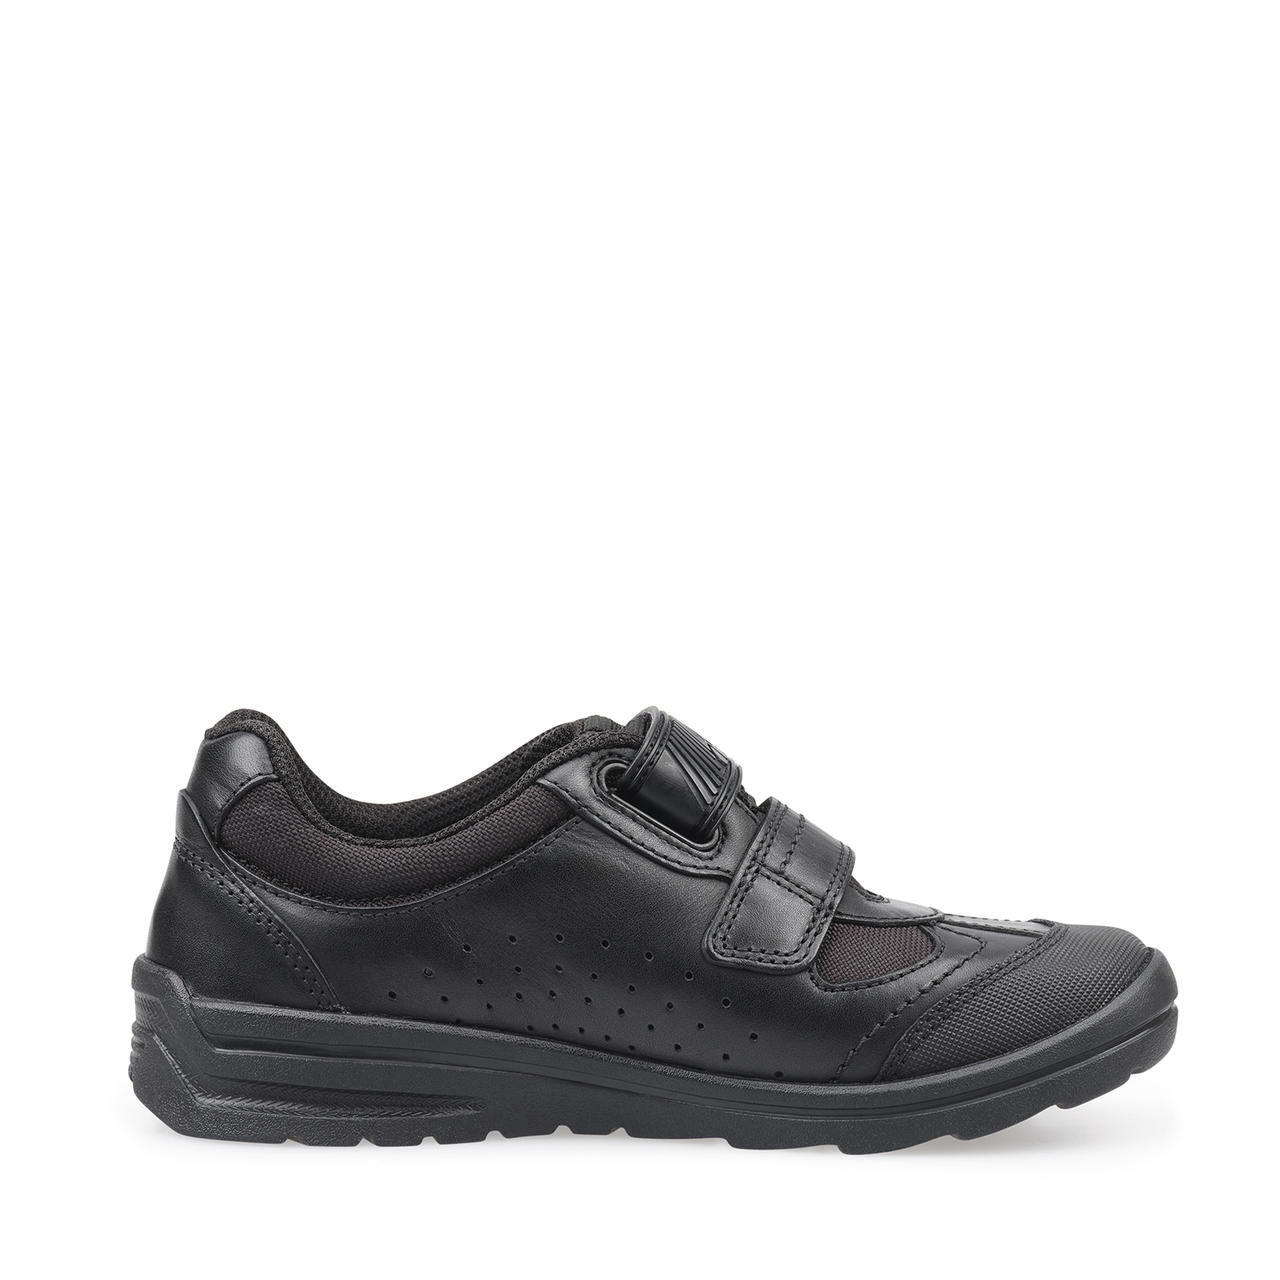 A boys school shoe by Start Rite,style Rocket, in black leather with double velcro fastening. Inner  view.